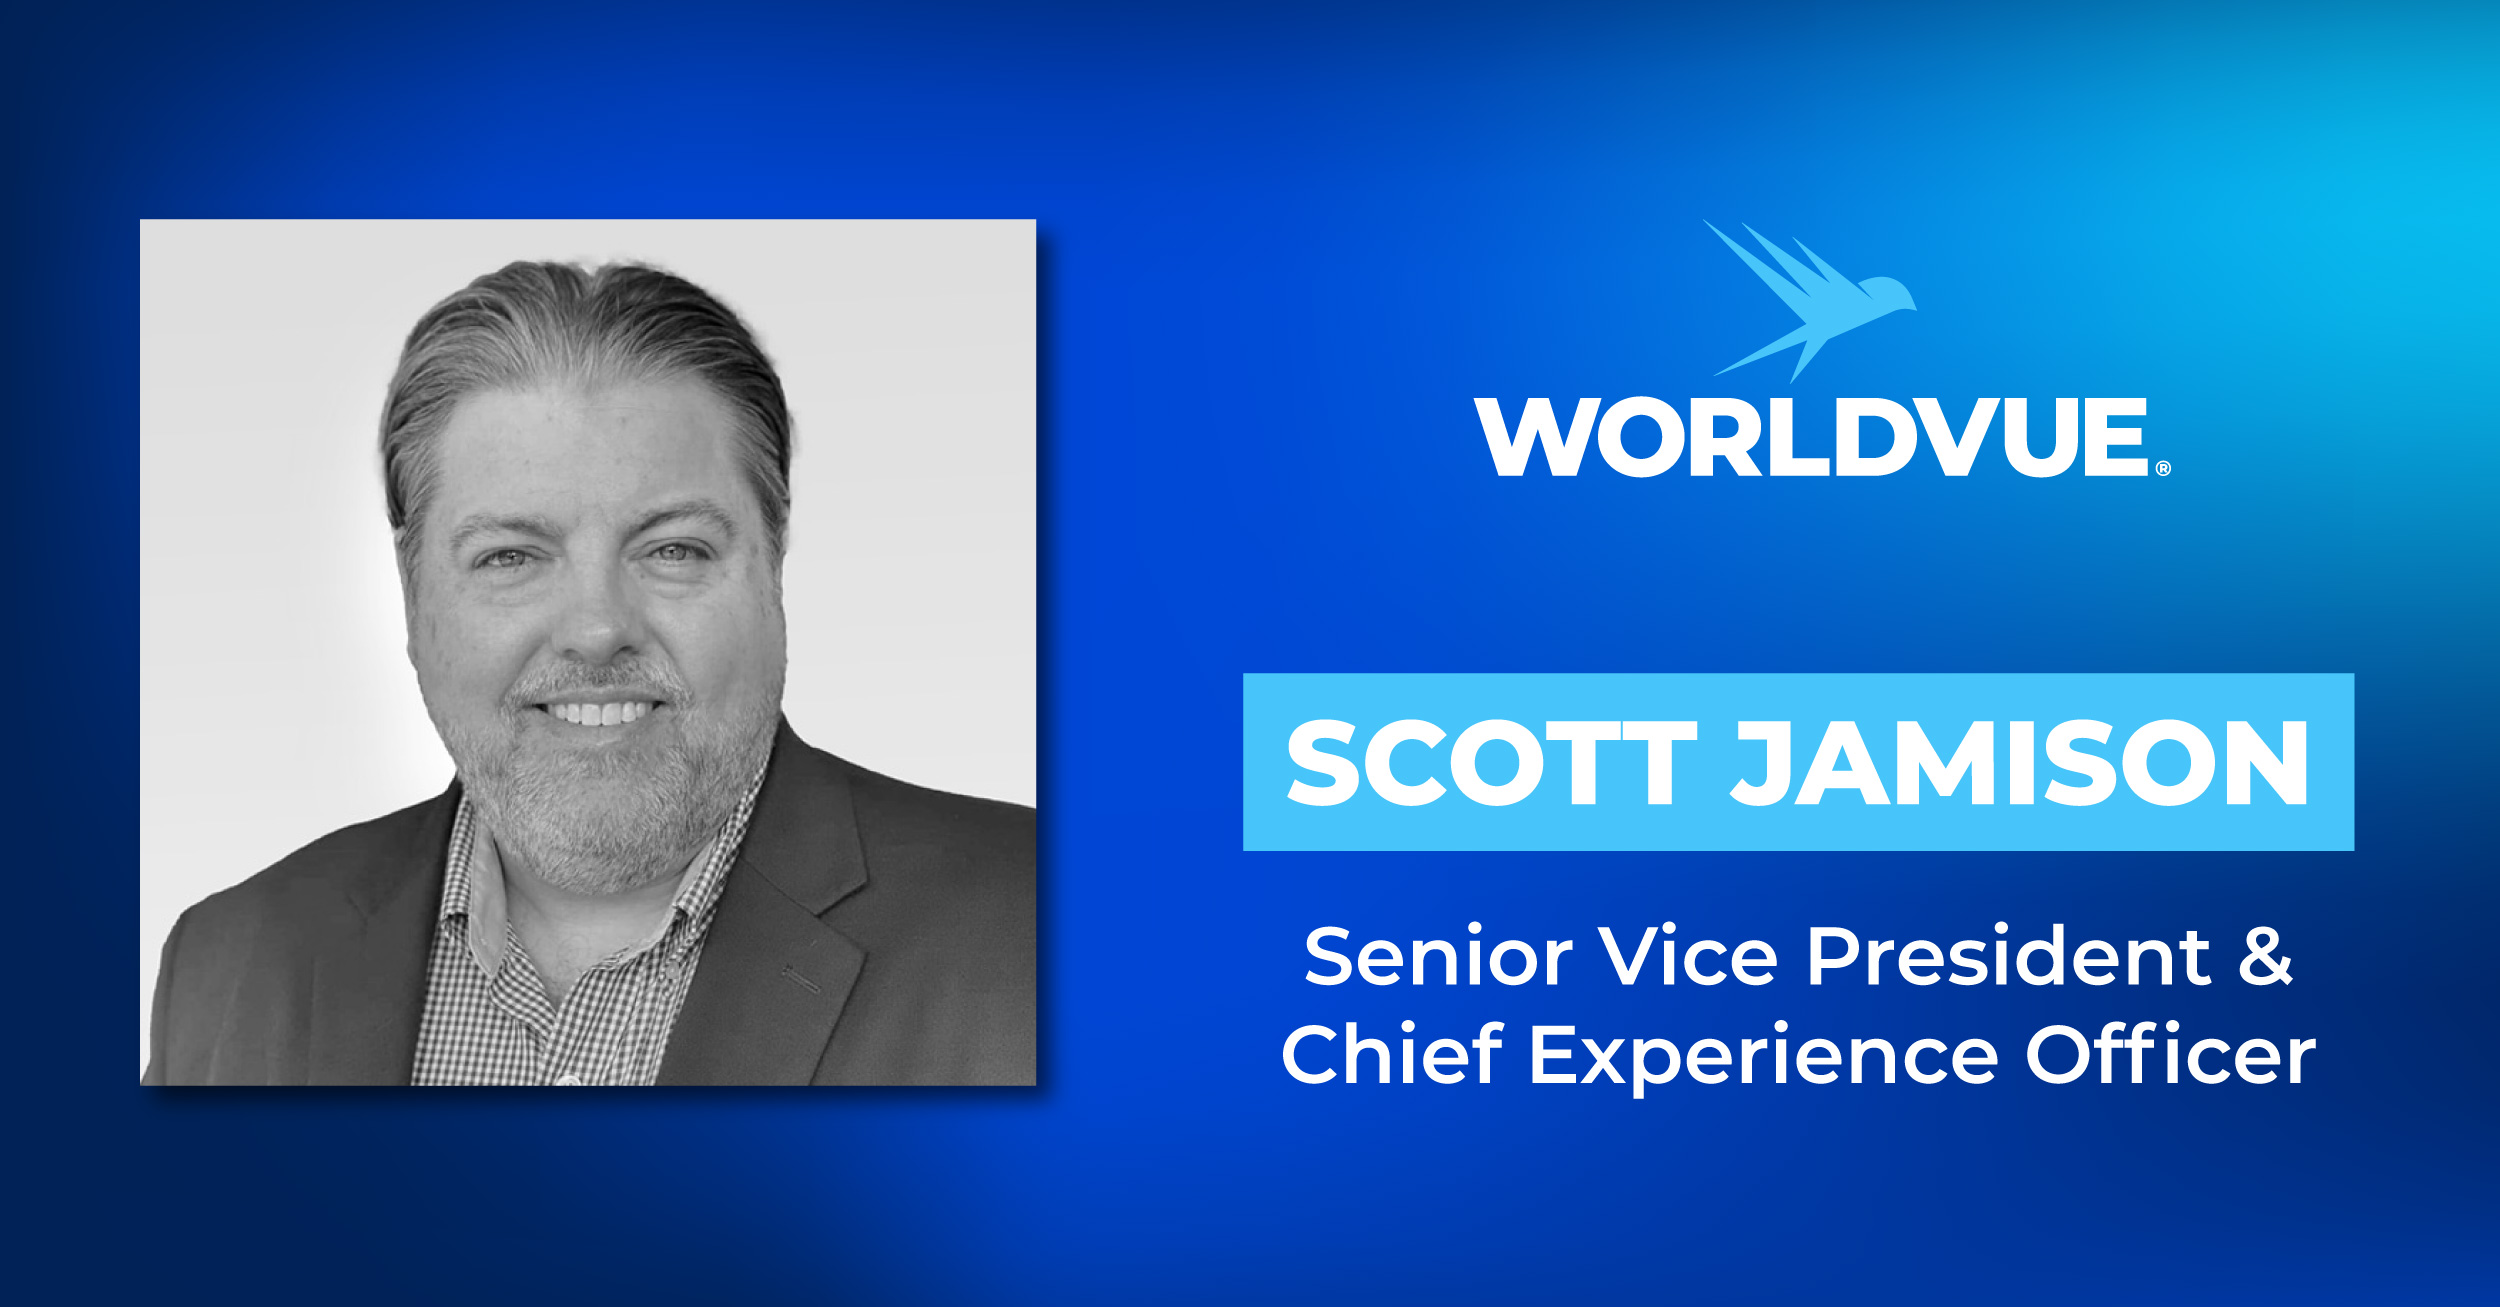 announcement of Scott Jamison as SVP and Chief Experience Officer, with WorldVue logo and headshot